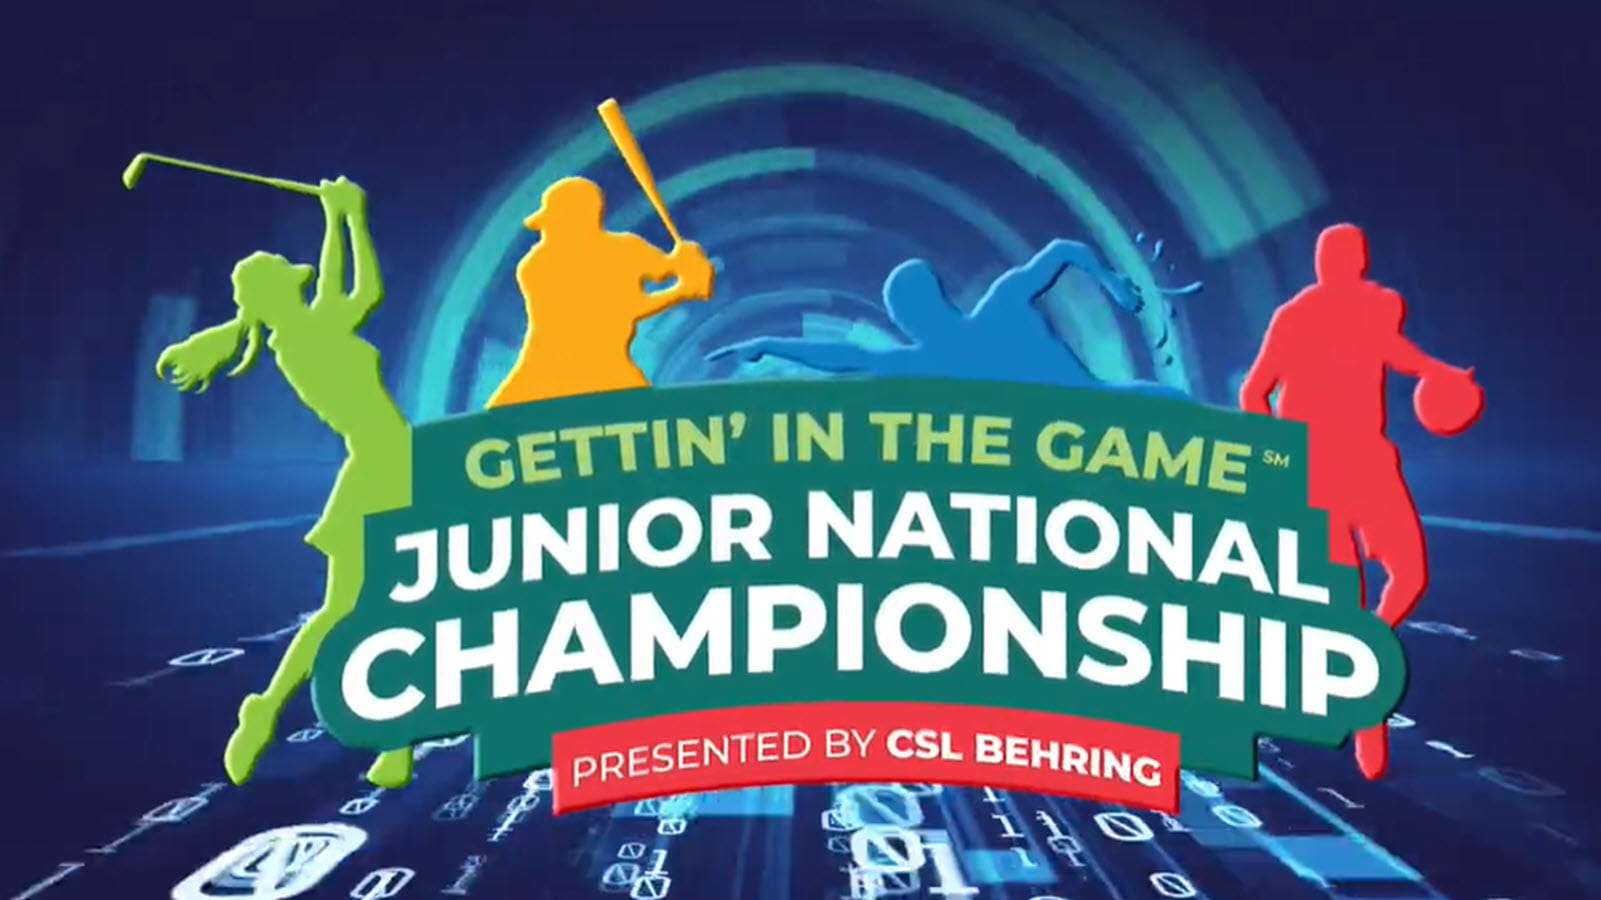 Illustrated logo for CSL Behring's Gettin' in the Game Junior National Championship with silhouettes of a golfer, baseball player, swimmer and a basketball player